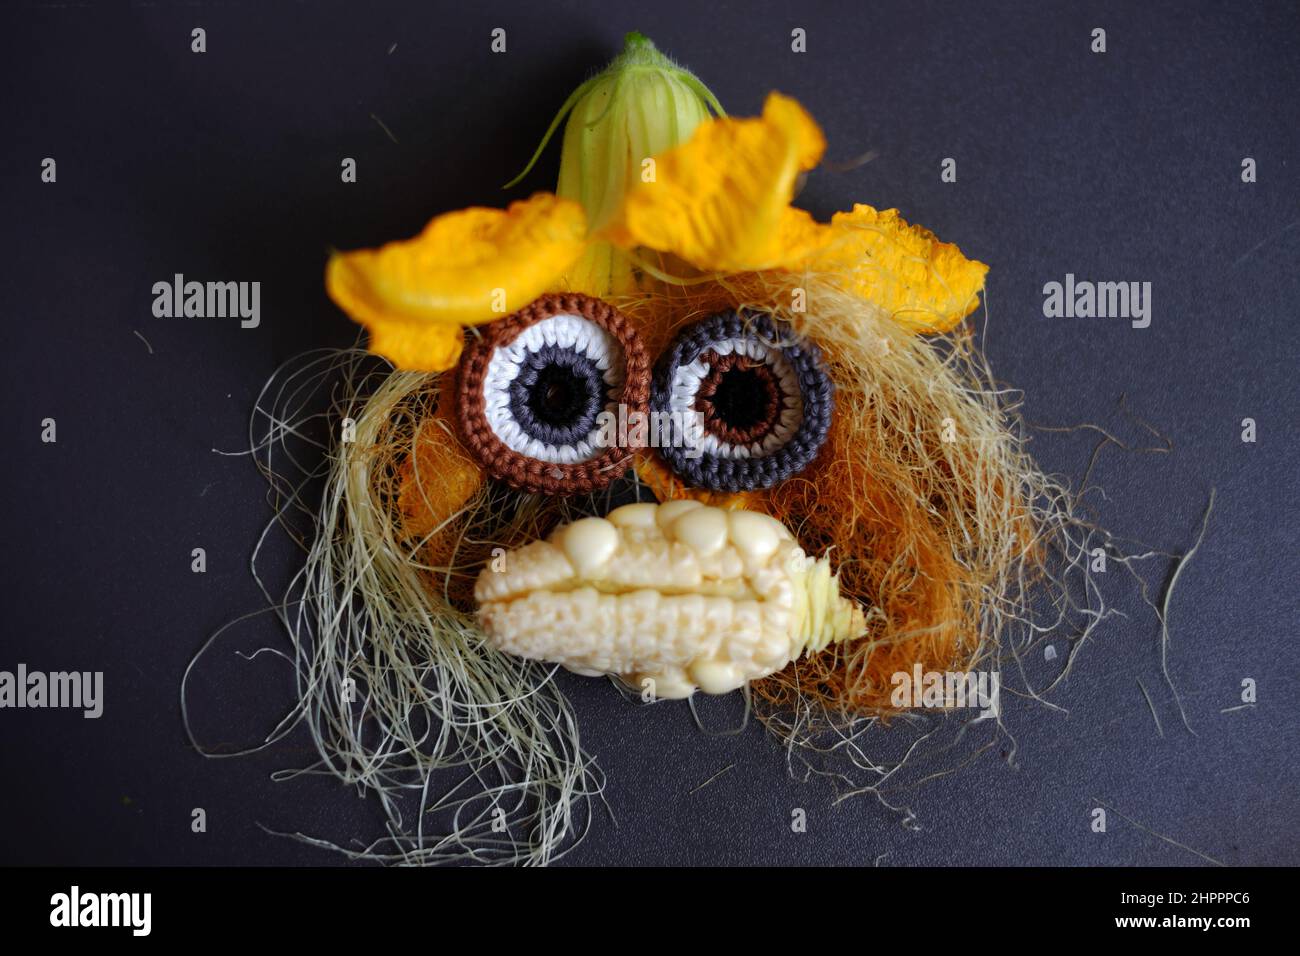 Funny face set up from food, agriculture product from rooftop garden, small corn, pumpkin flower, corn silk and eyes crochet from yarn make cute Stock Photo